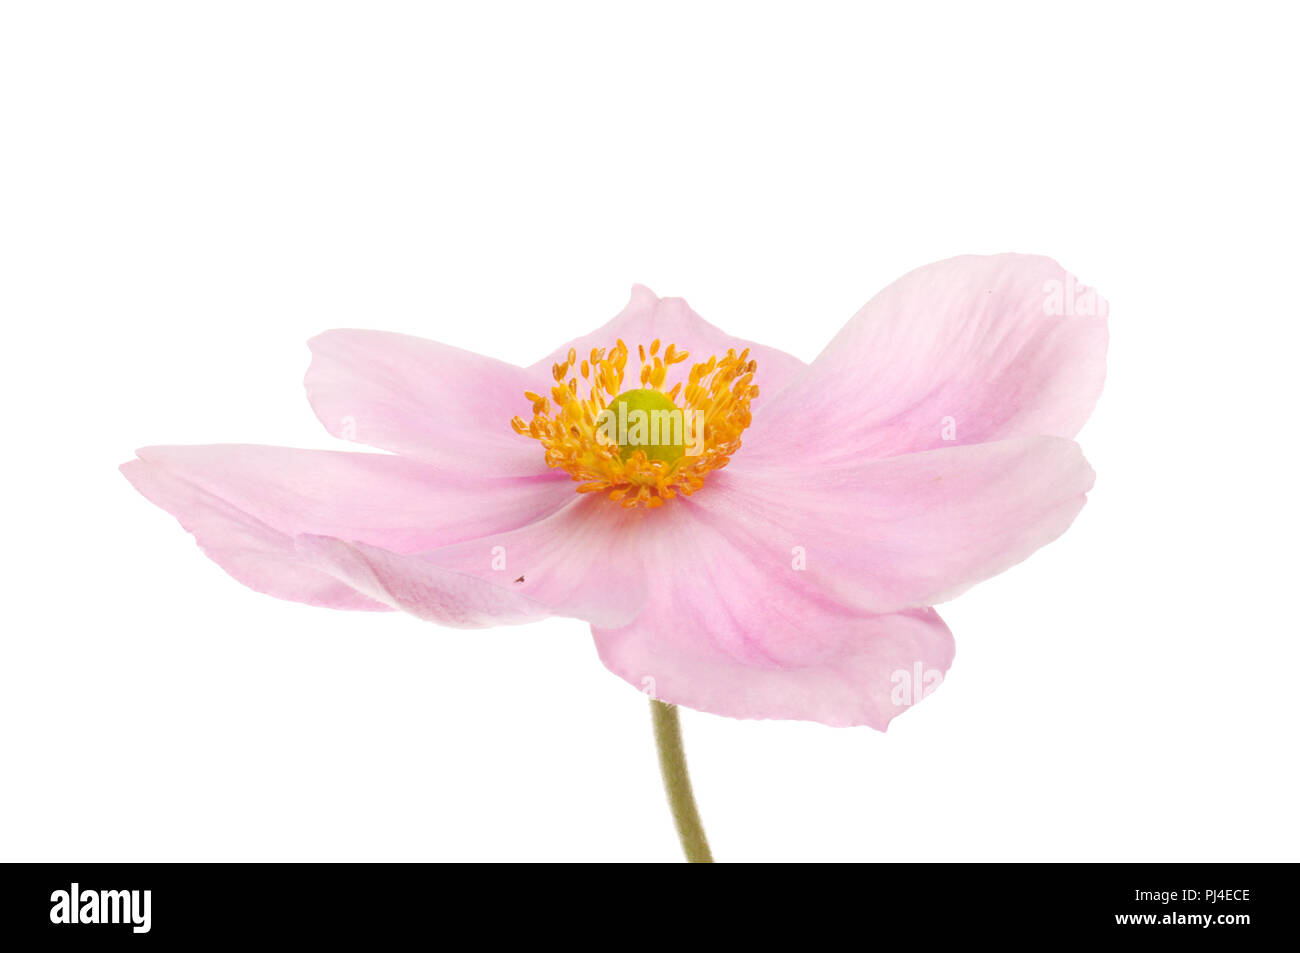 Anemone flower isolated on white Banque D'Images